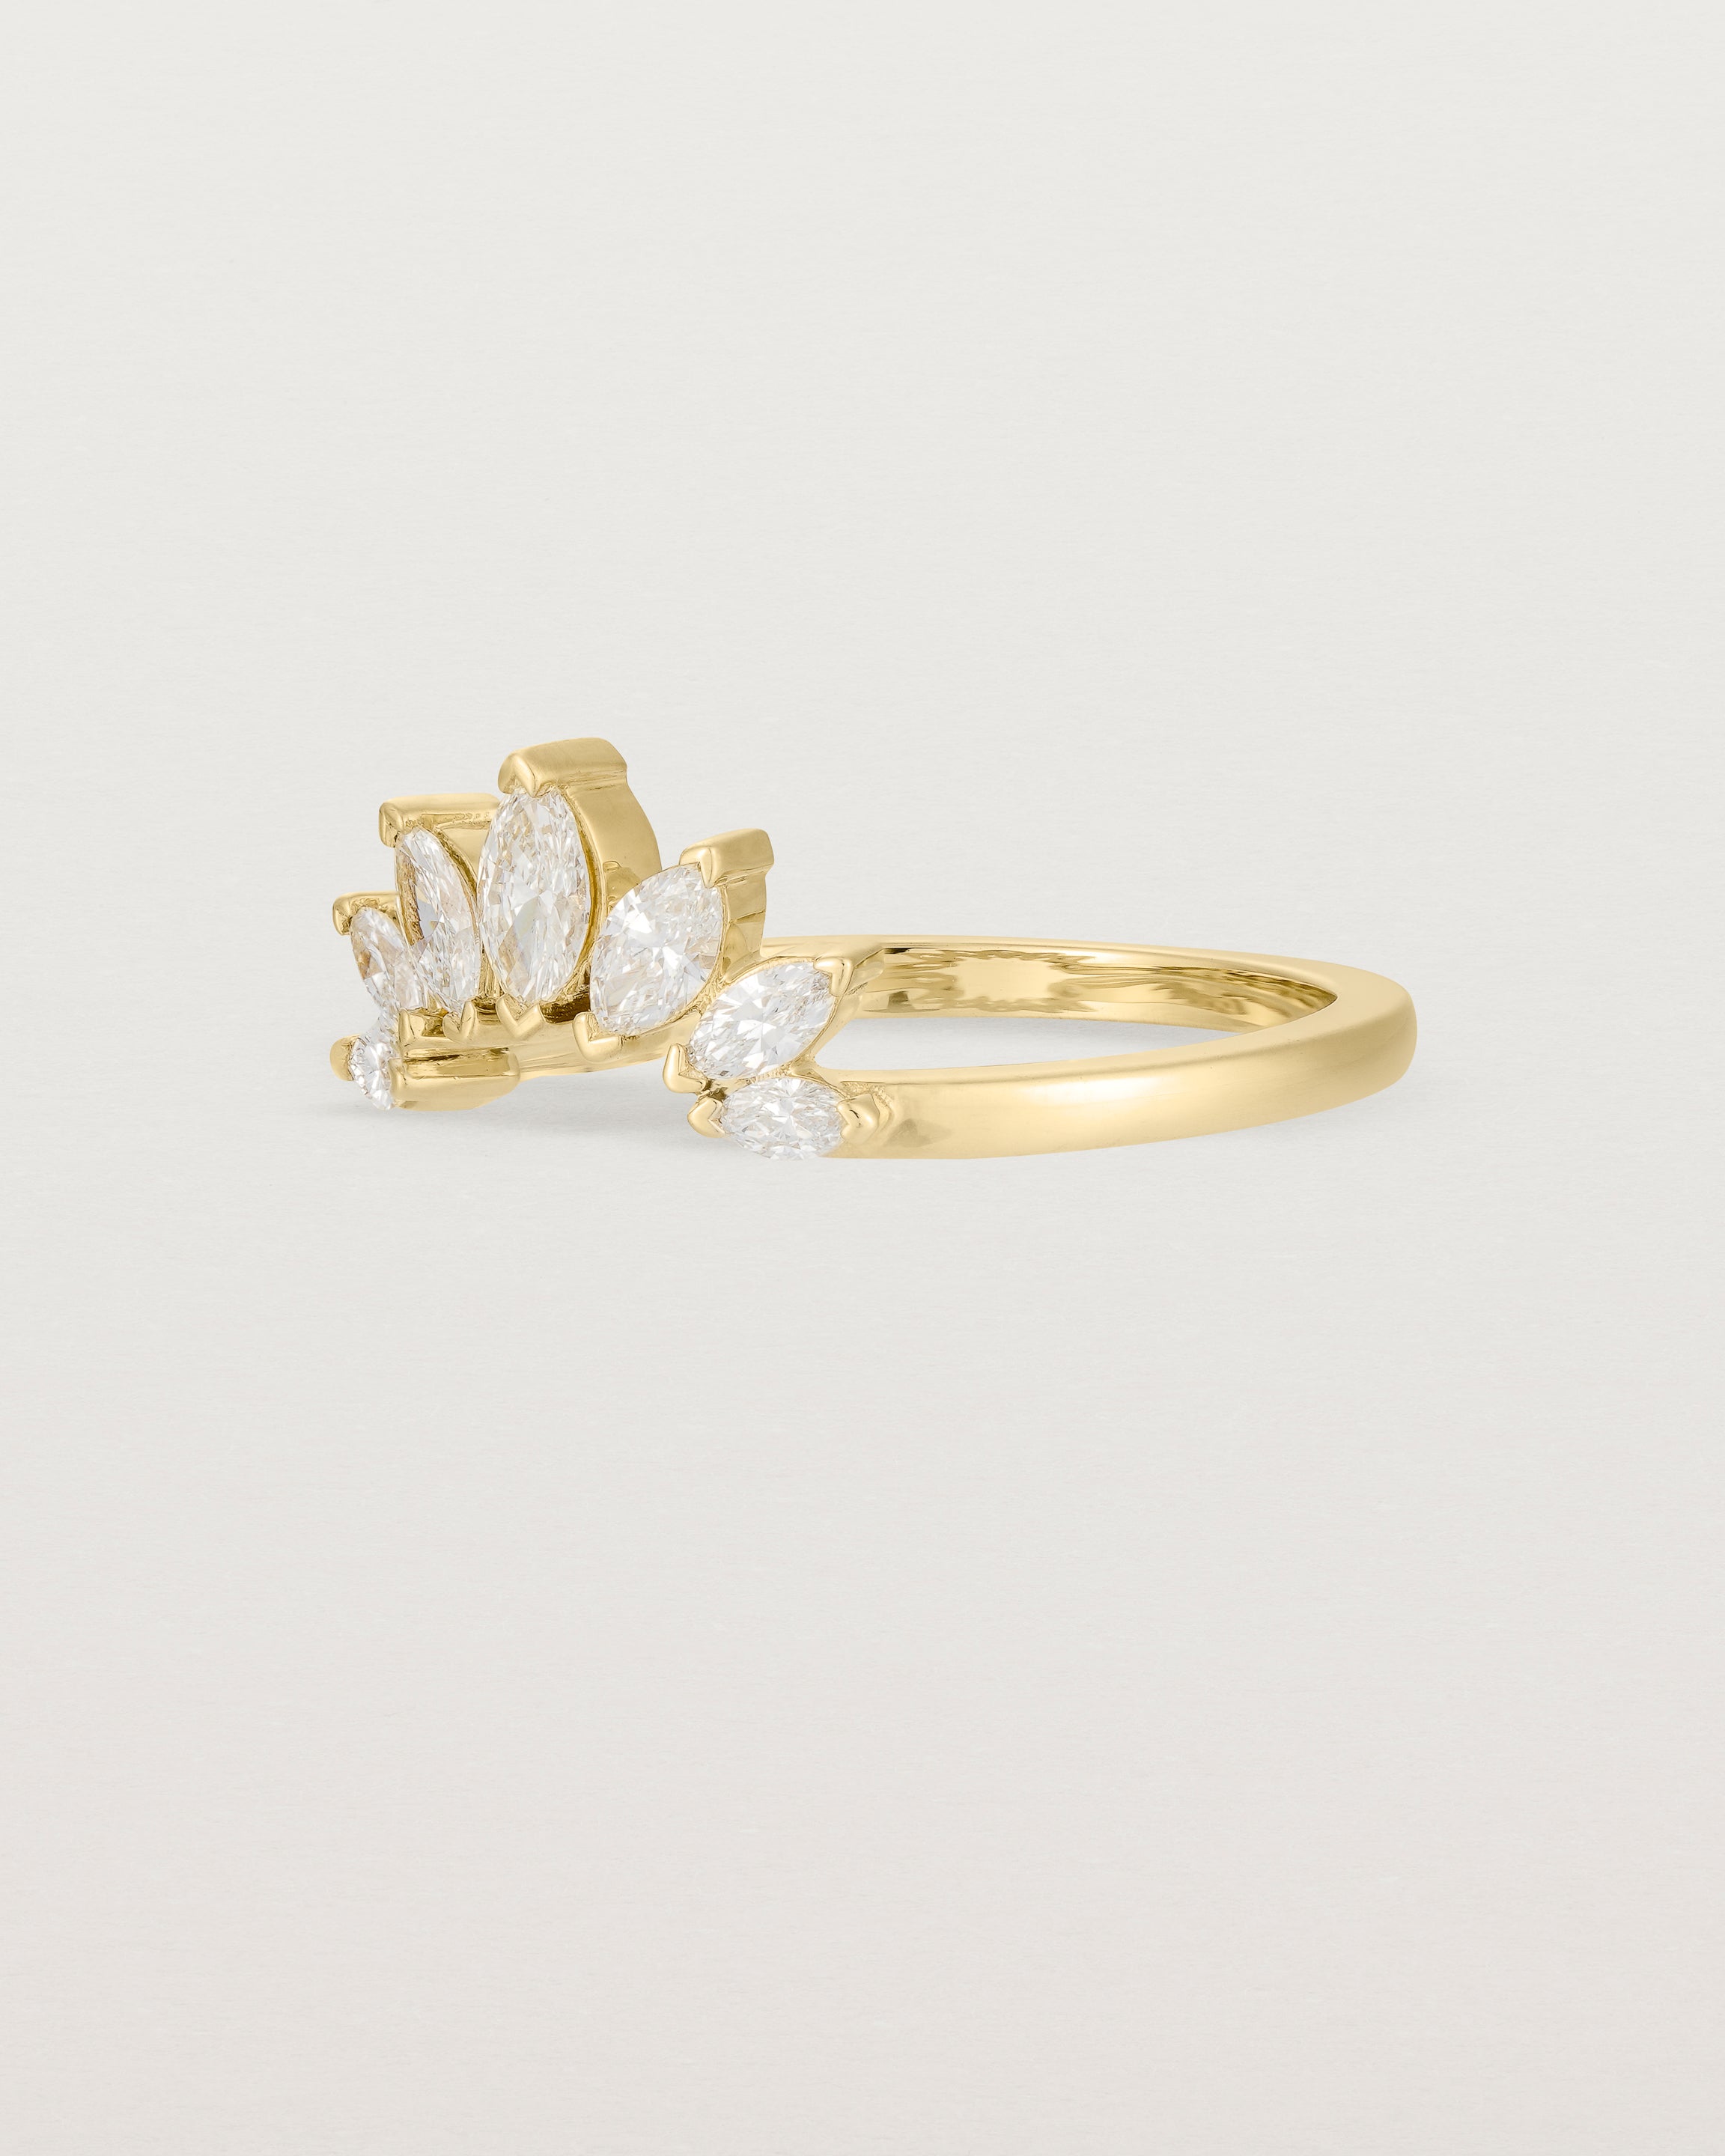 A white diamond, sun-beam inspired crown ring crafted in yellow gold